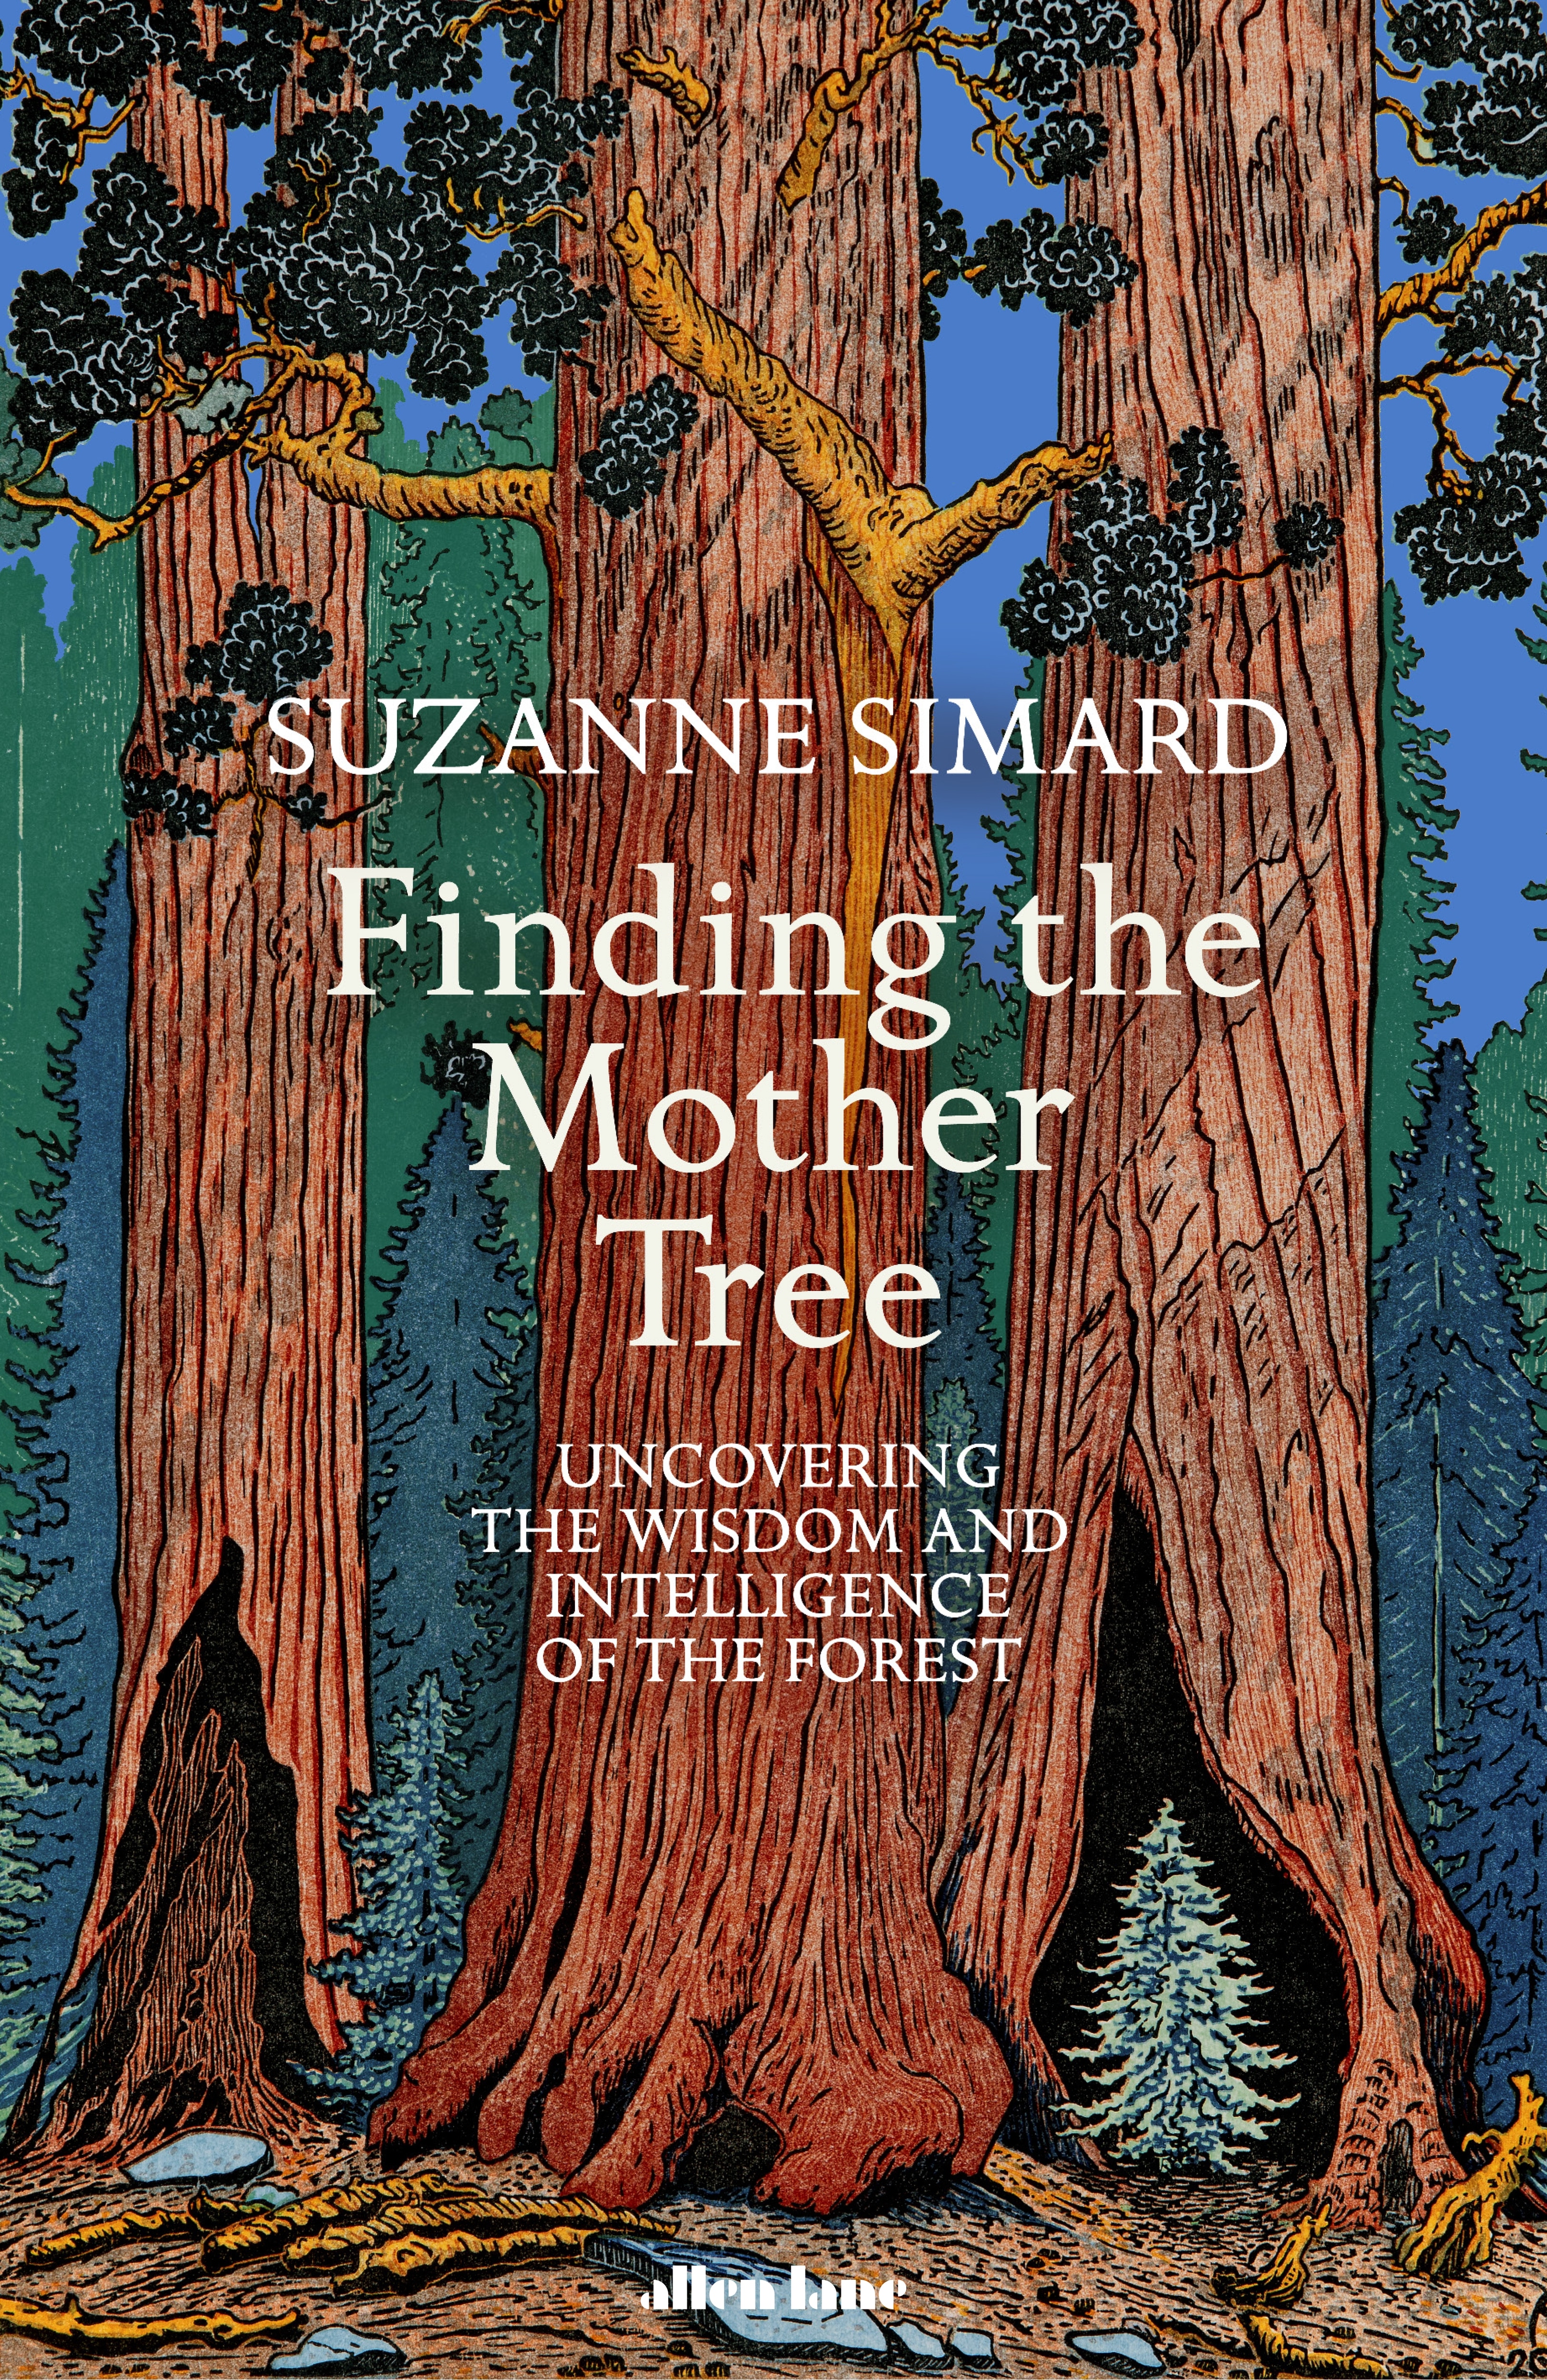 Book “Finding the Mother Tree” by Suzanne Simard — May 4, 2021